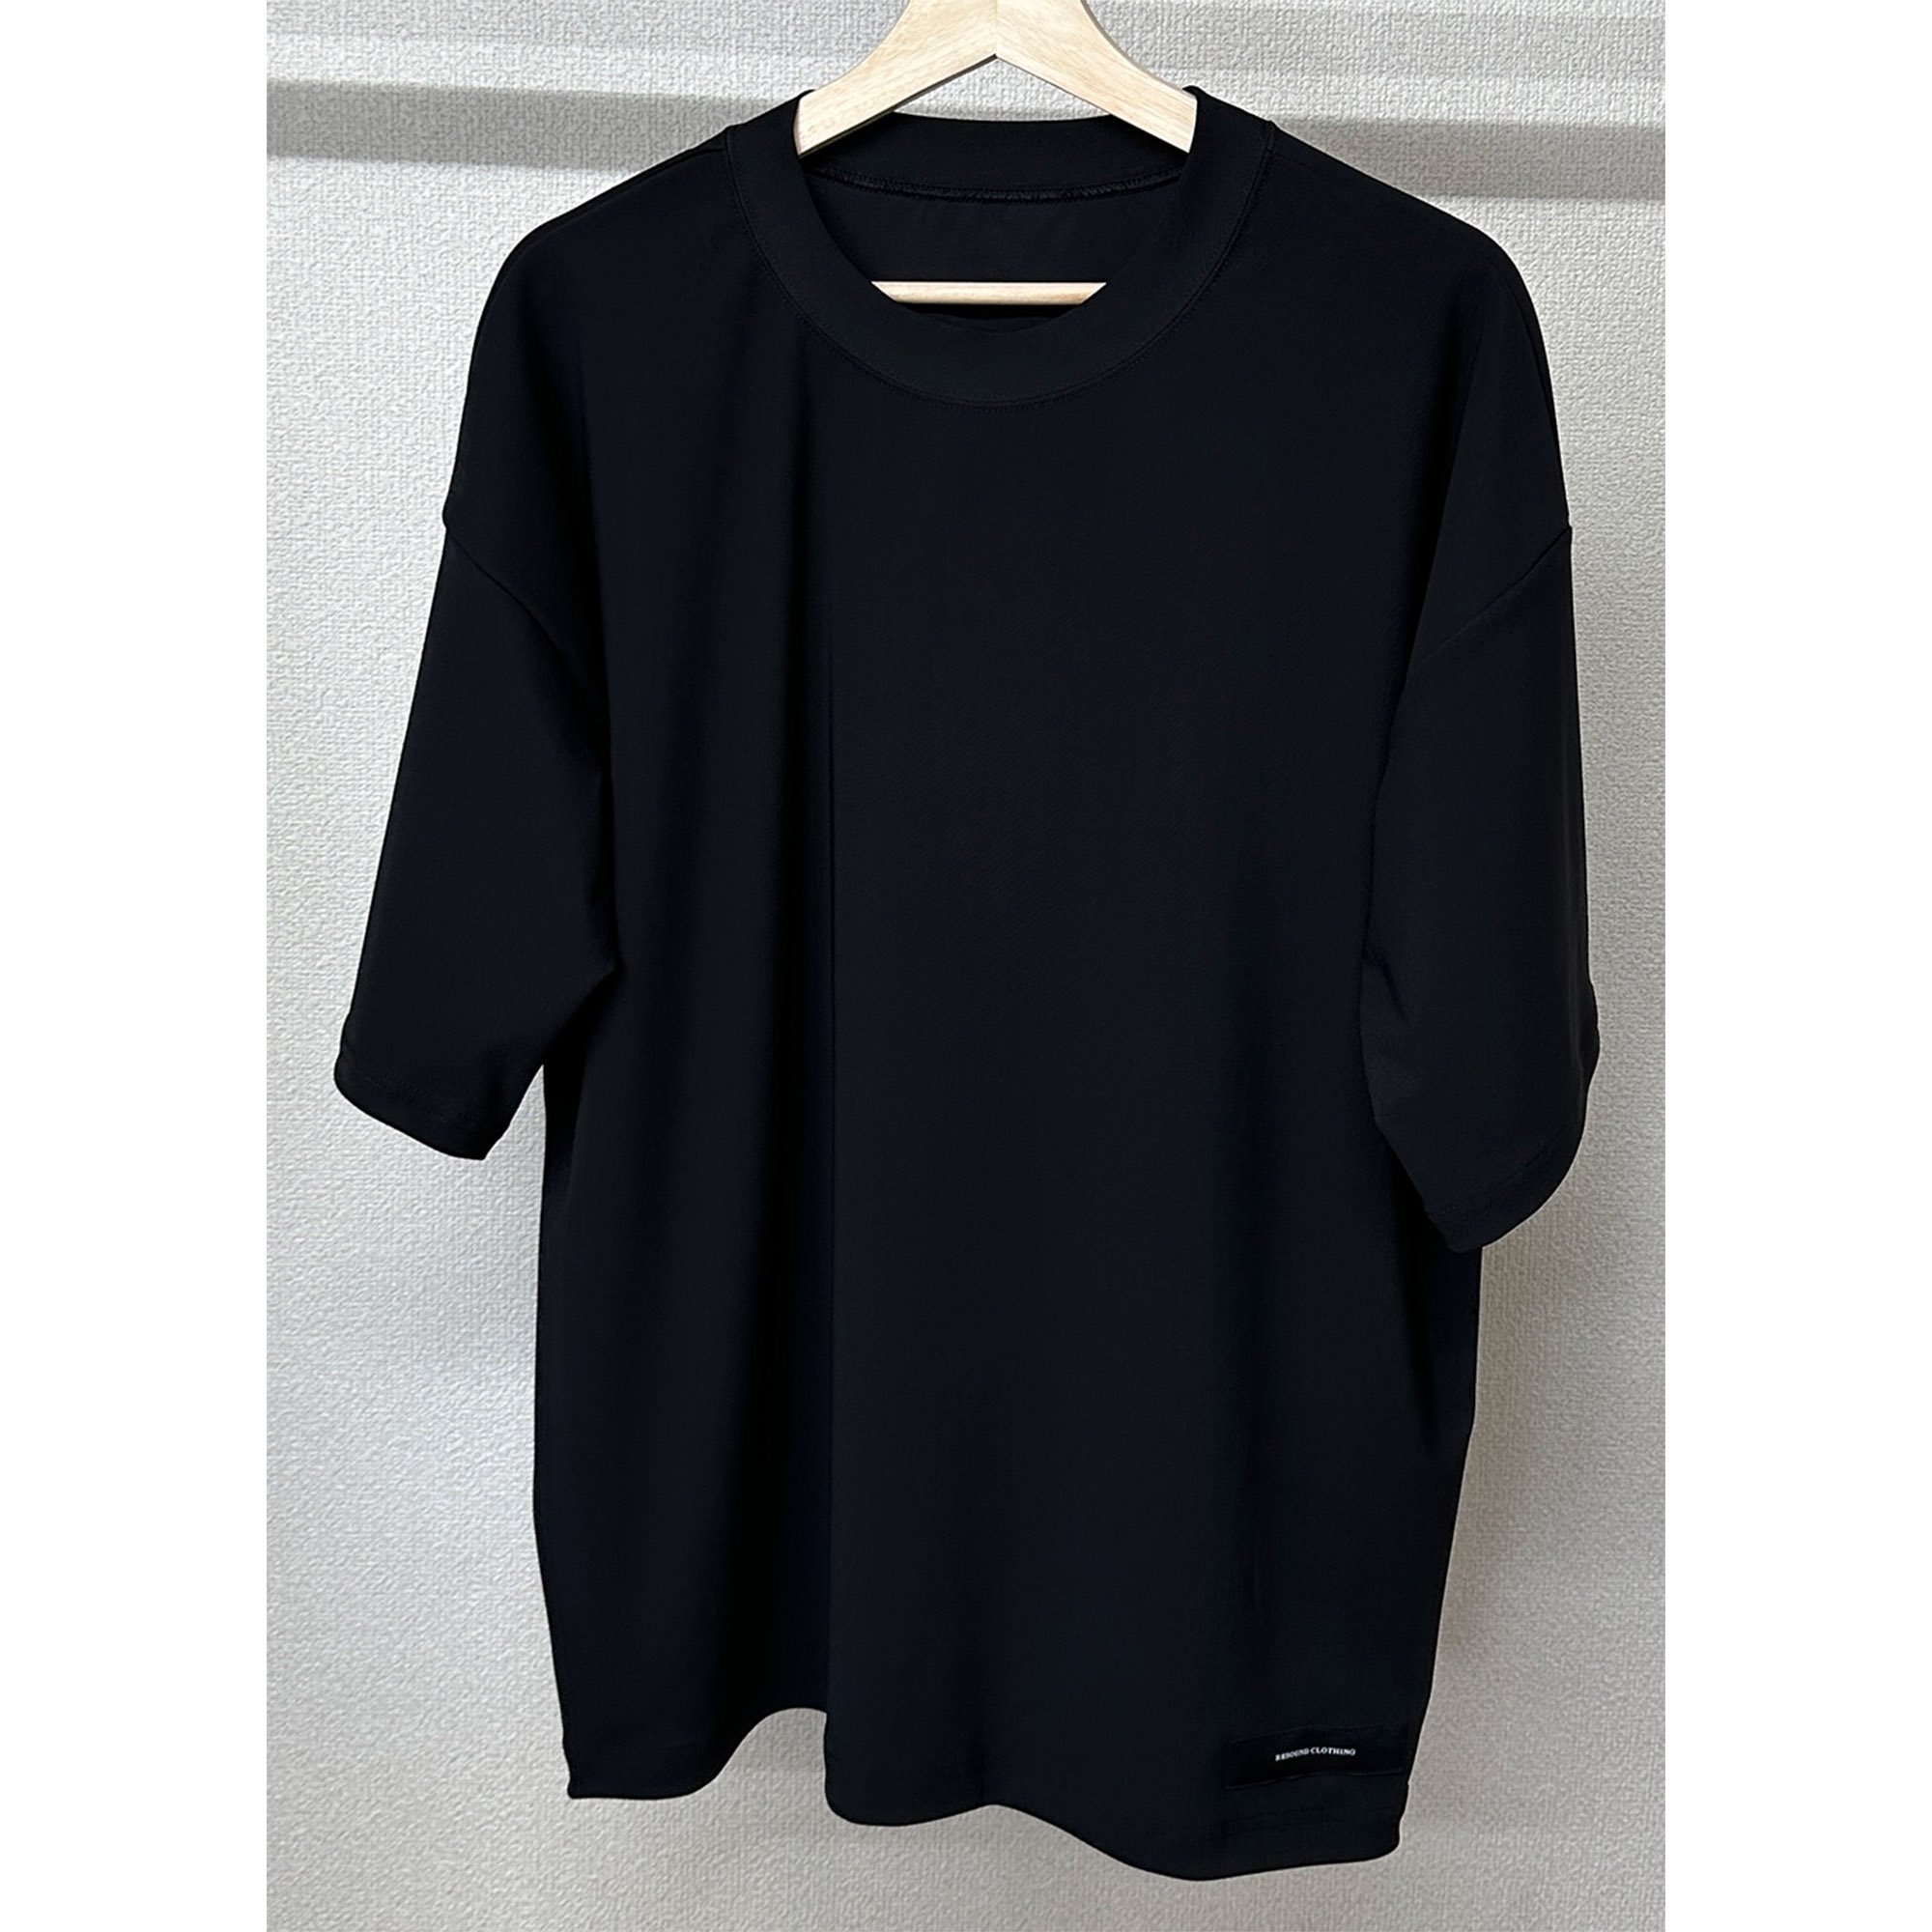 <img class='new_mark_img1' src='https://img.shop-pro.jp/img/new/icons1.gif' style='border:none;display:inline;margin:0px;padding:0px;width:auto;' />OX JERSEY OVER TEE BLACK